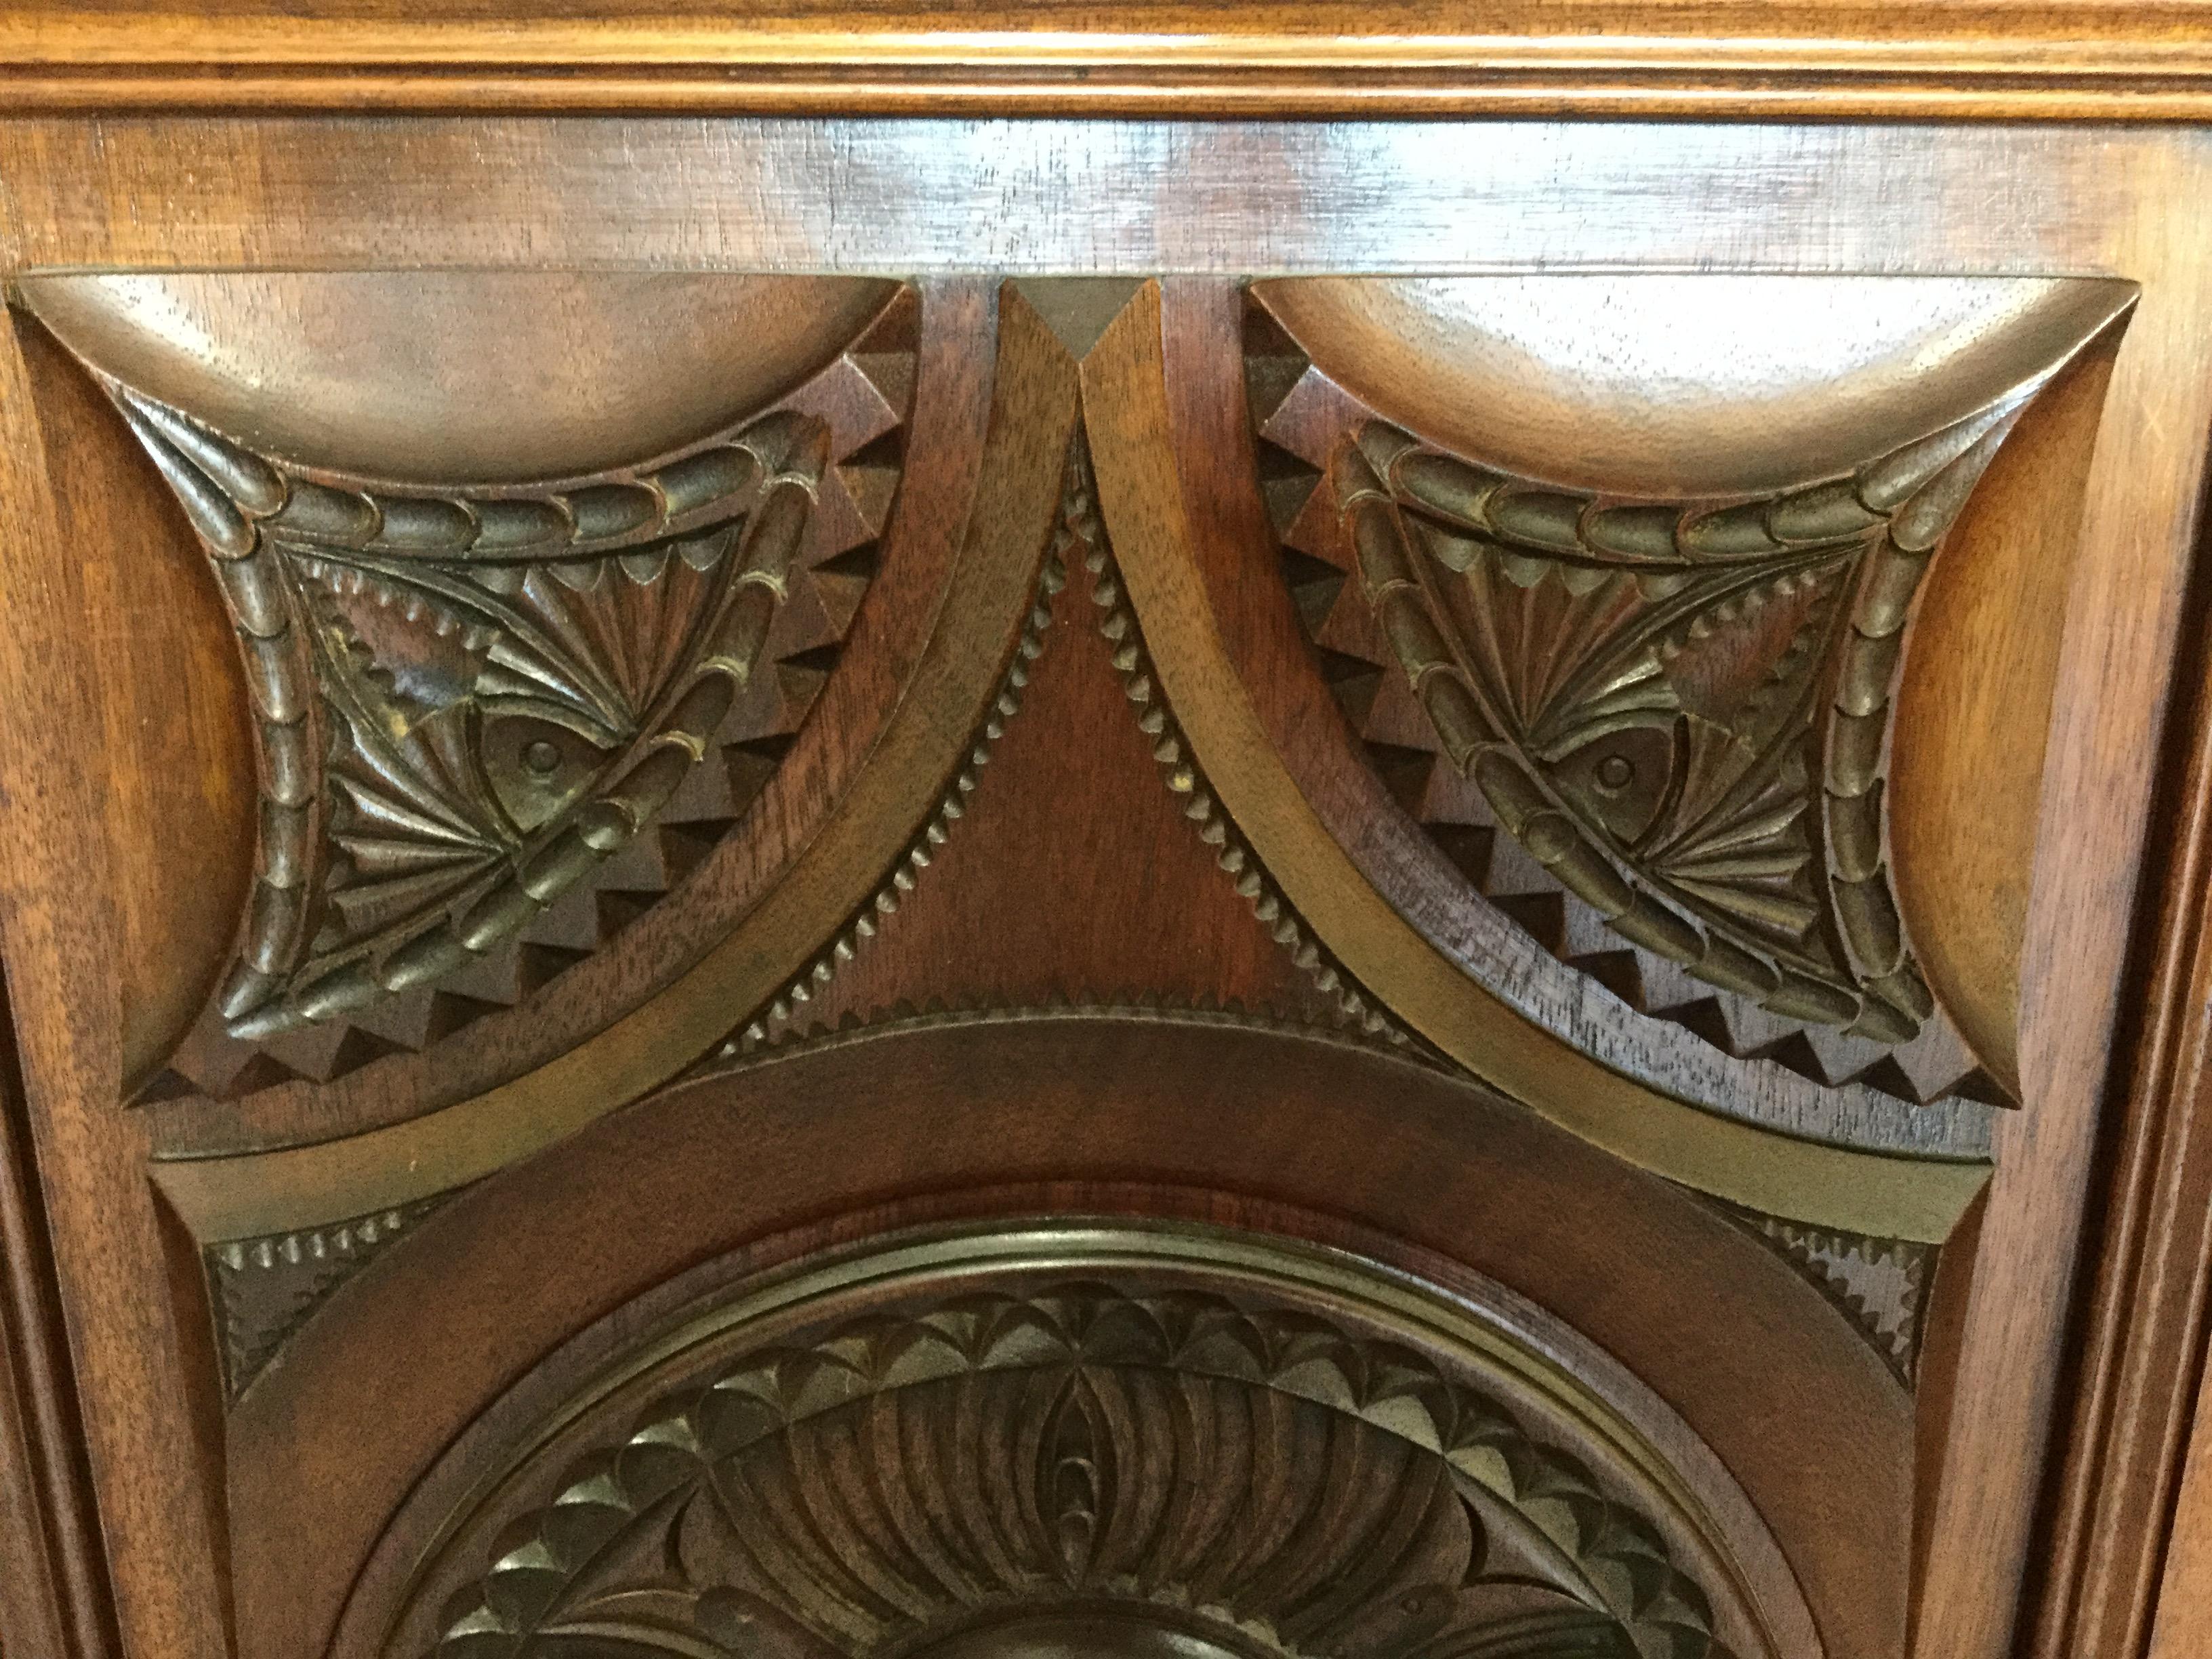 Custom made in France, this armoire/bookcase features exquisite carving over the entire piece.
Reminiscent of the Spanish Renaissance, you will love the warmth and beauty of the chestnut wood. There are 2 doors and an open space for lots of